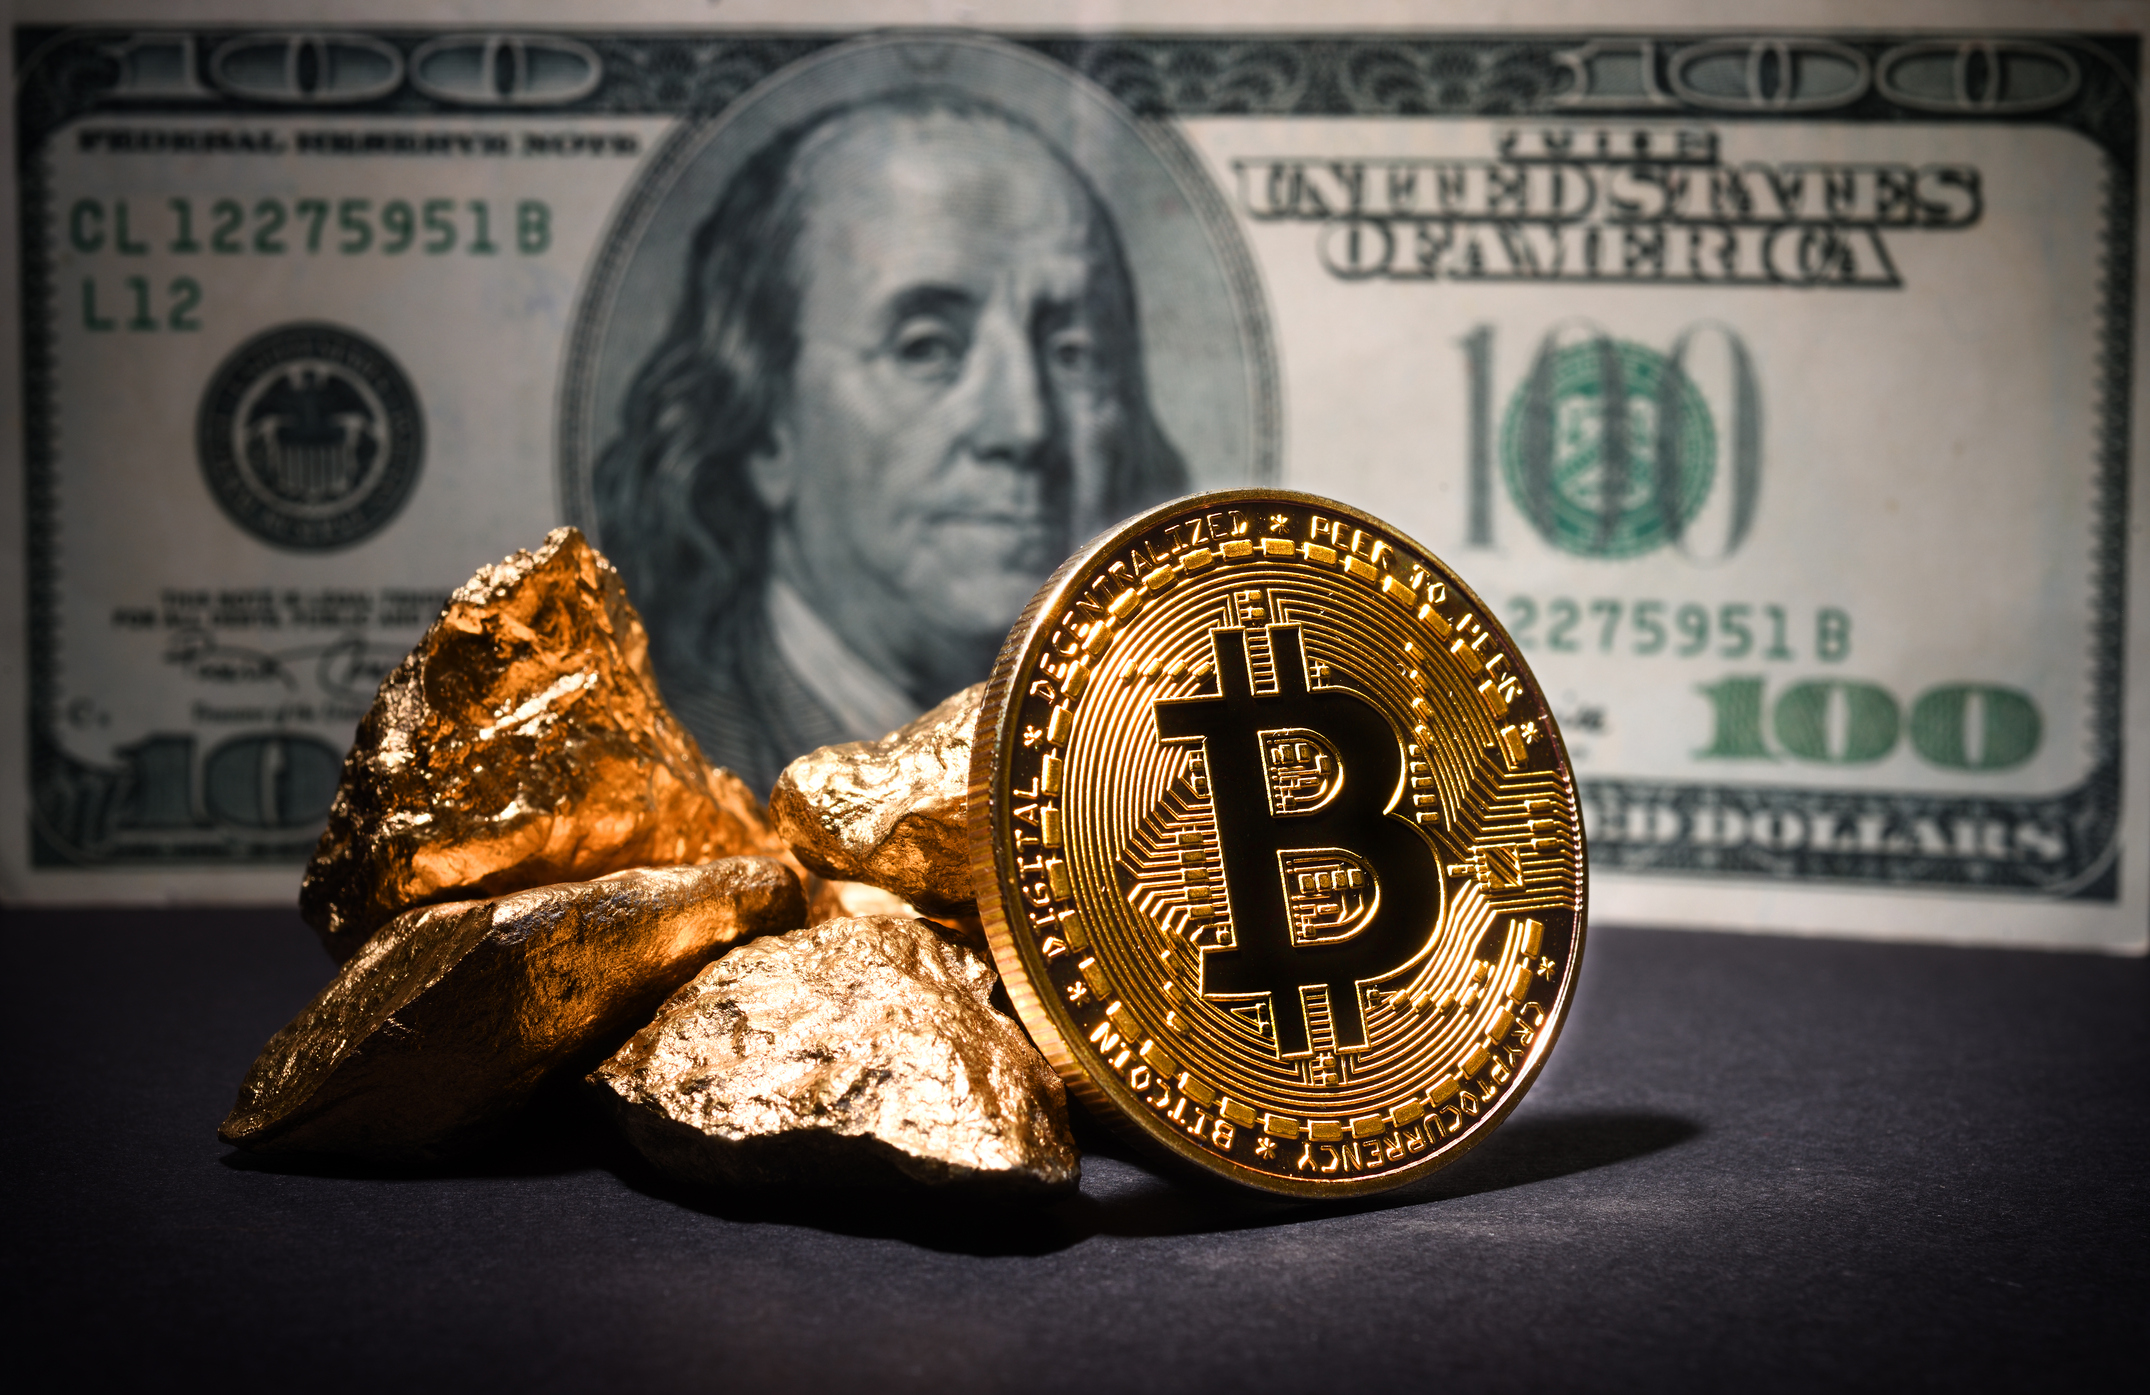 Bloomberg Expert Analyst Explains Why A Fall To $10,000 Isn’t Bad For Bitcoin